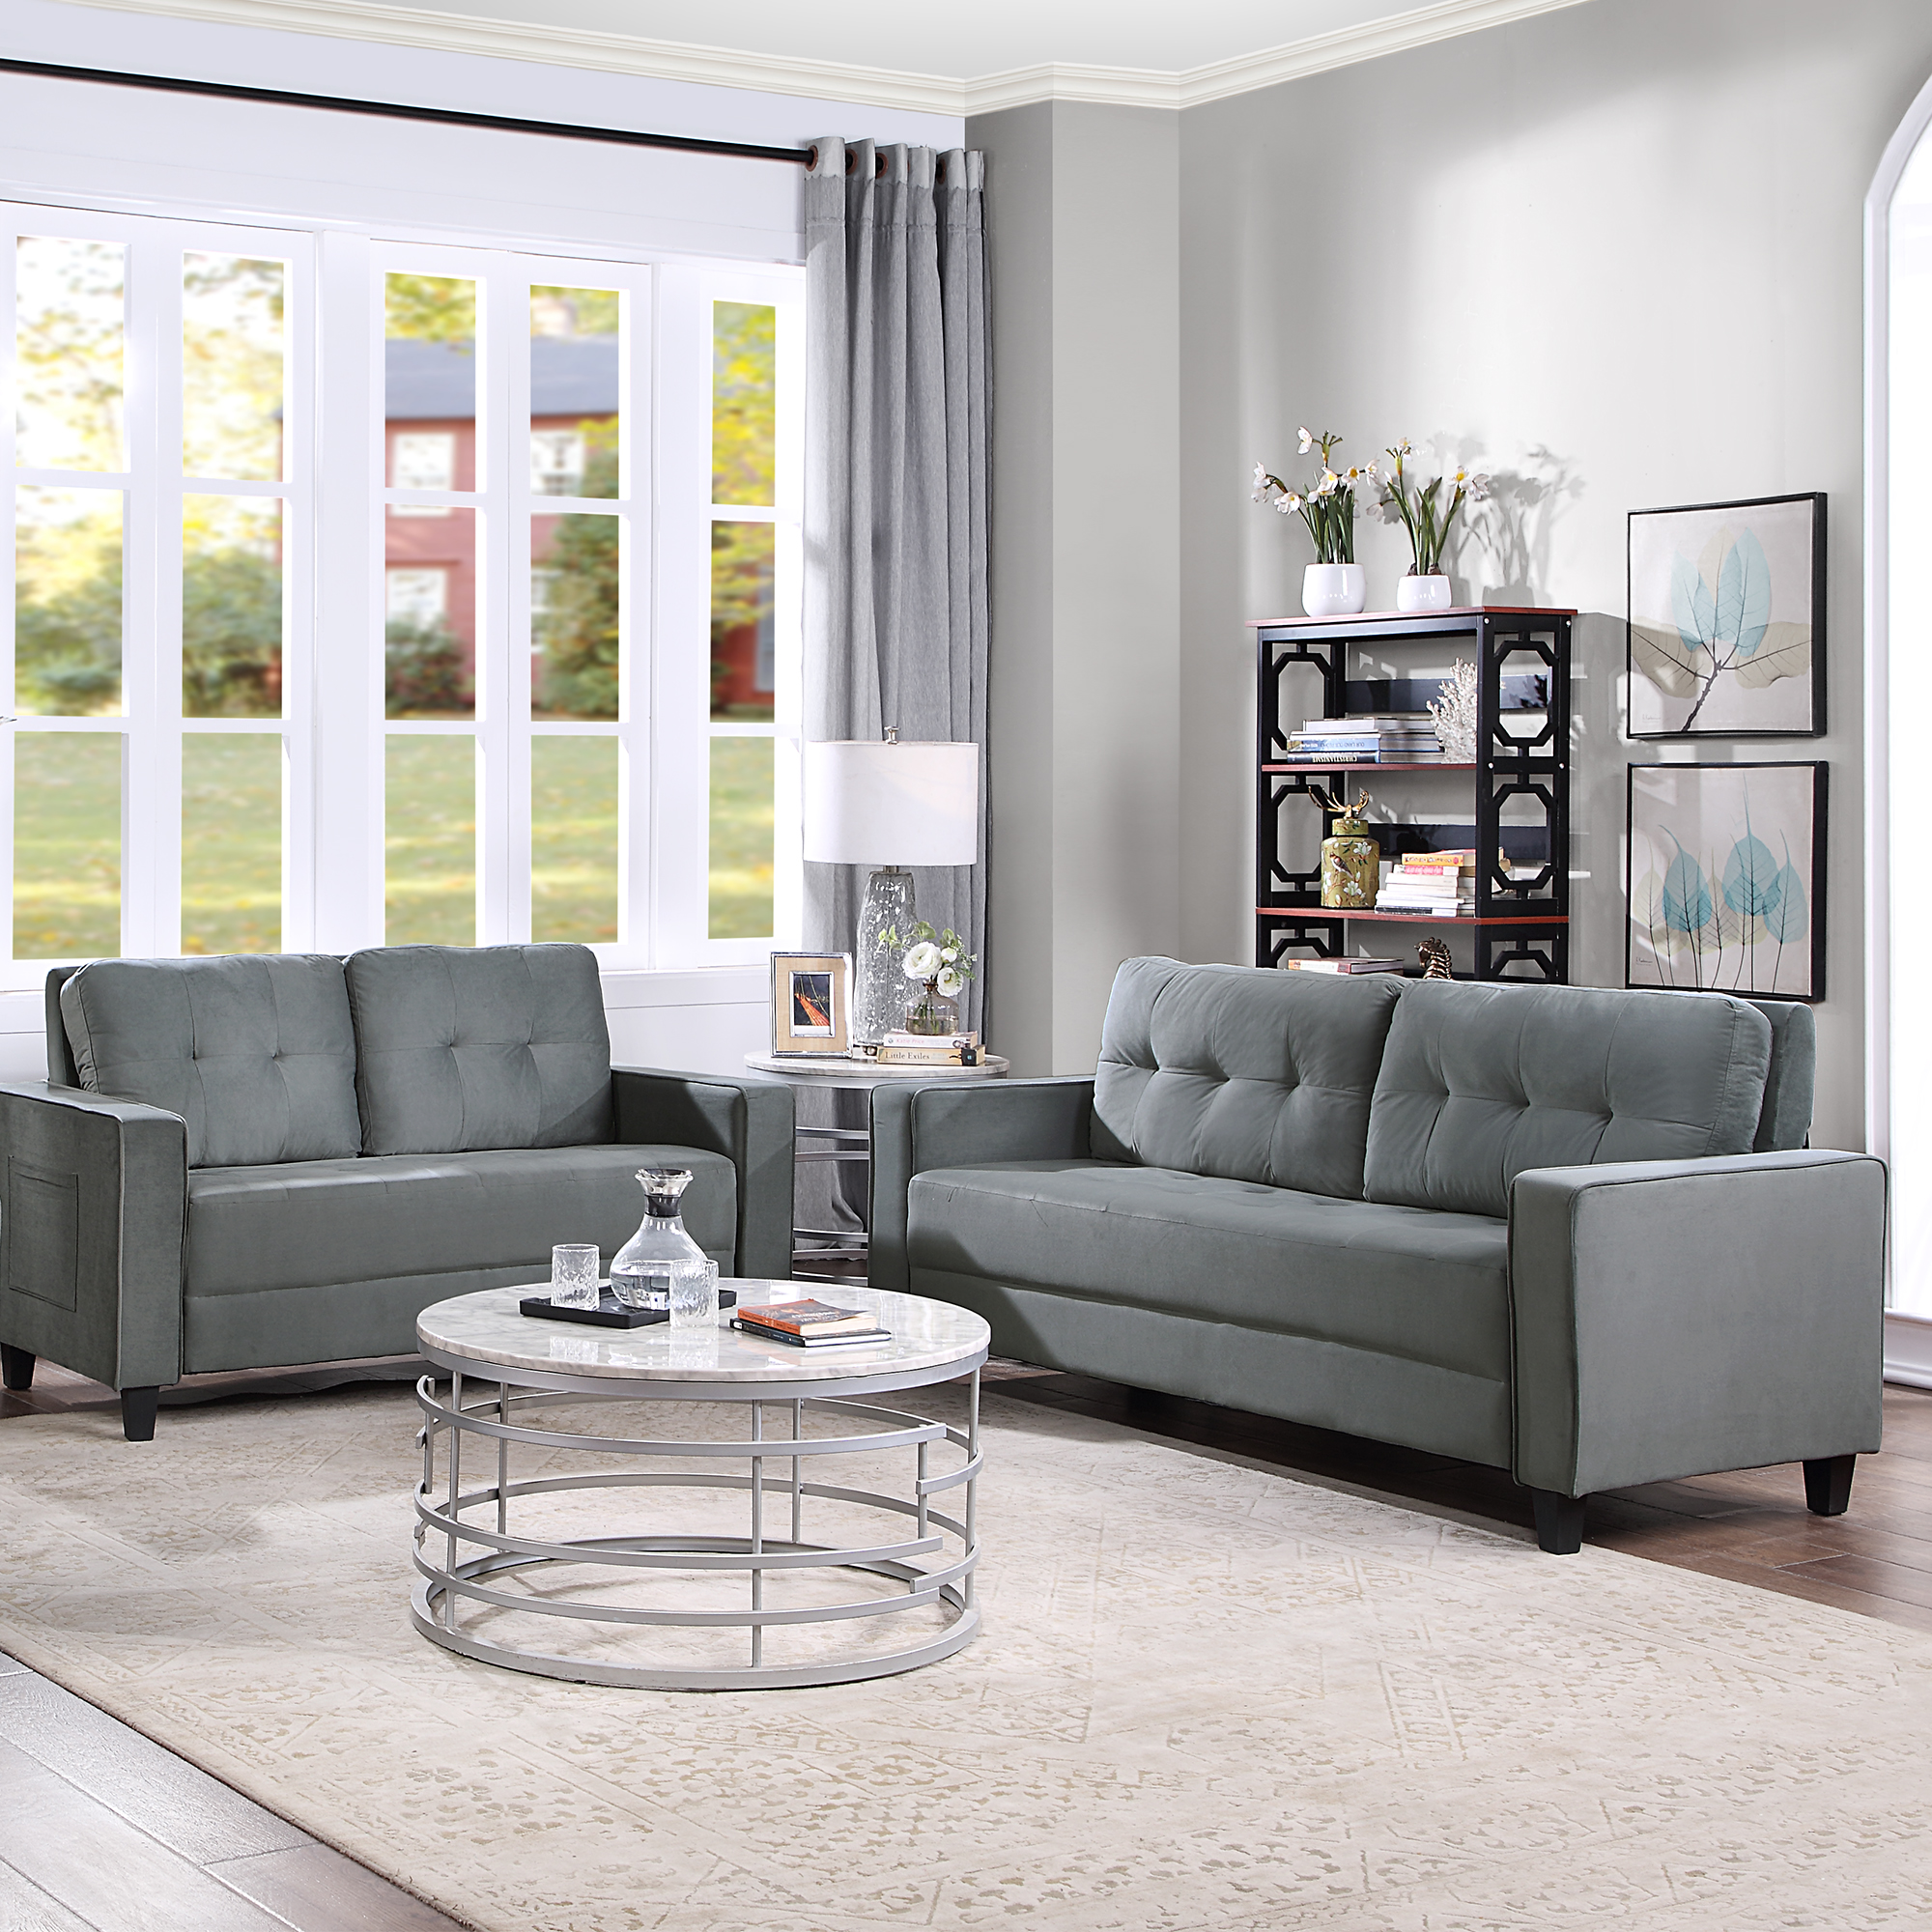 Morden Style Upholstered Sectional Sofa Set, 2+3 Seat - SG000307AAA